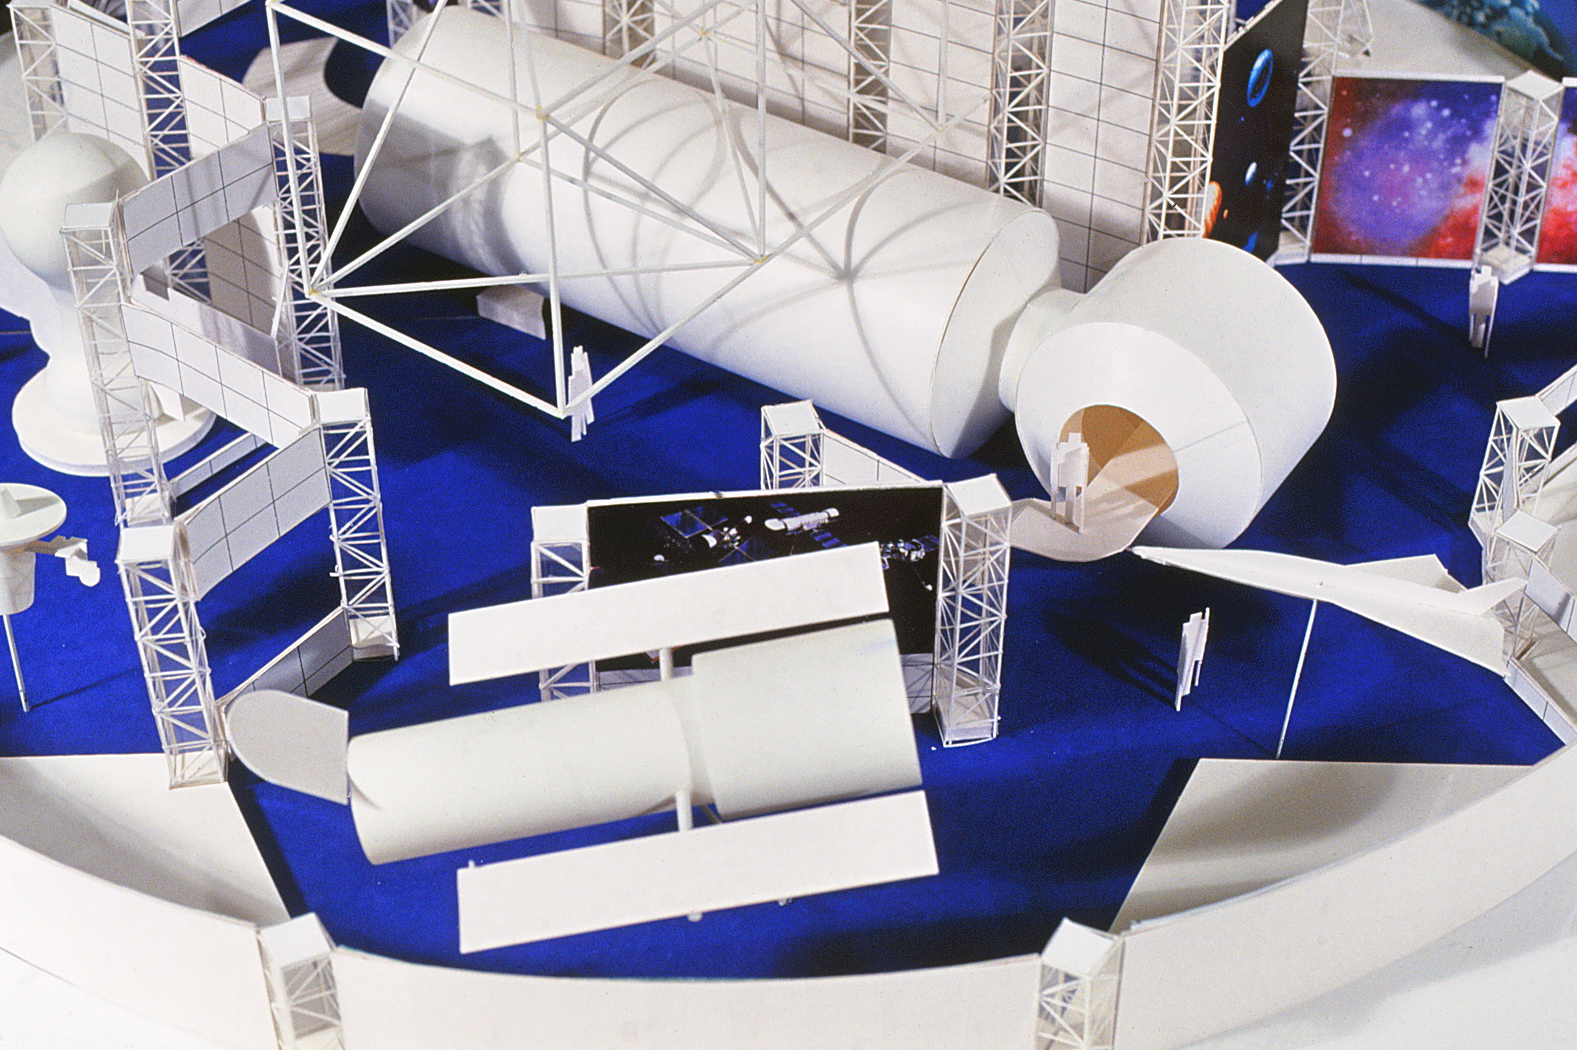 Model view of the exhibit, featuring the Hubble Space Telescope.